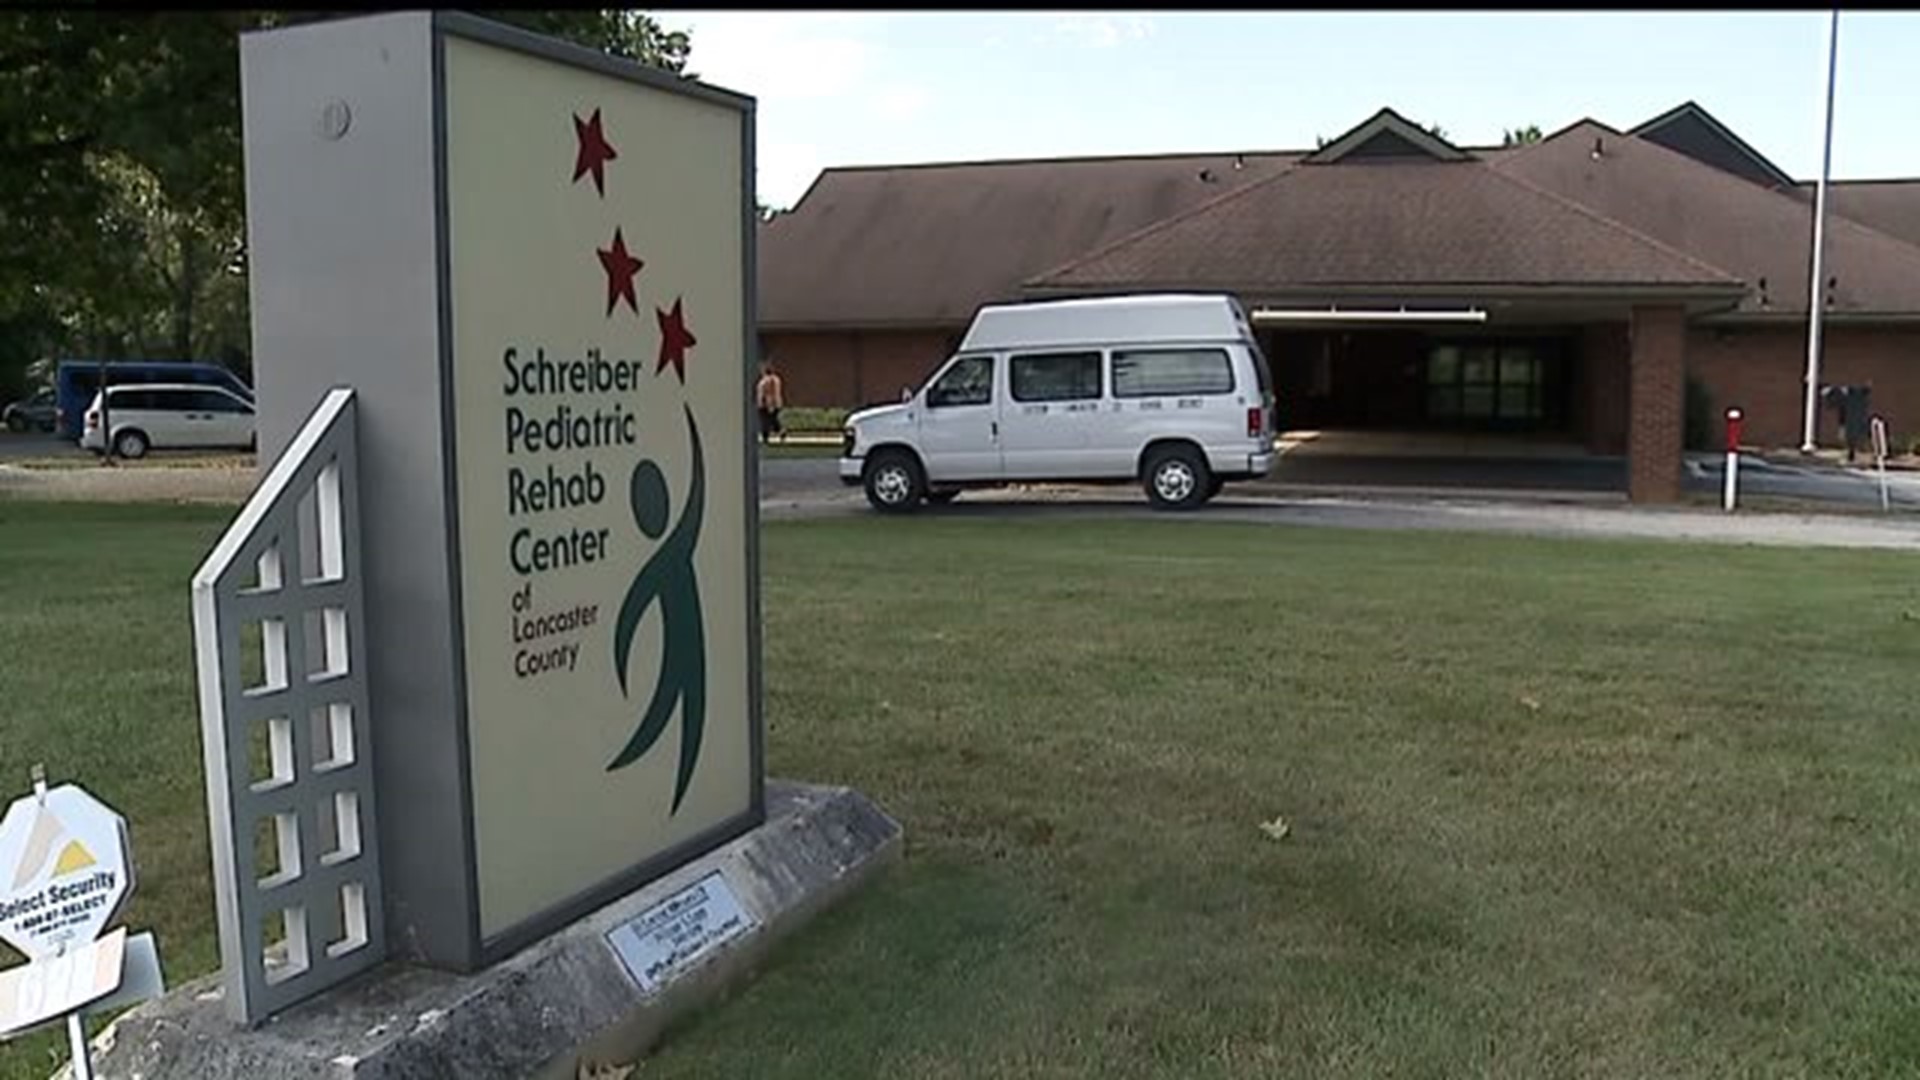 Schreiber Pediatric to receive largest donation ever